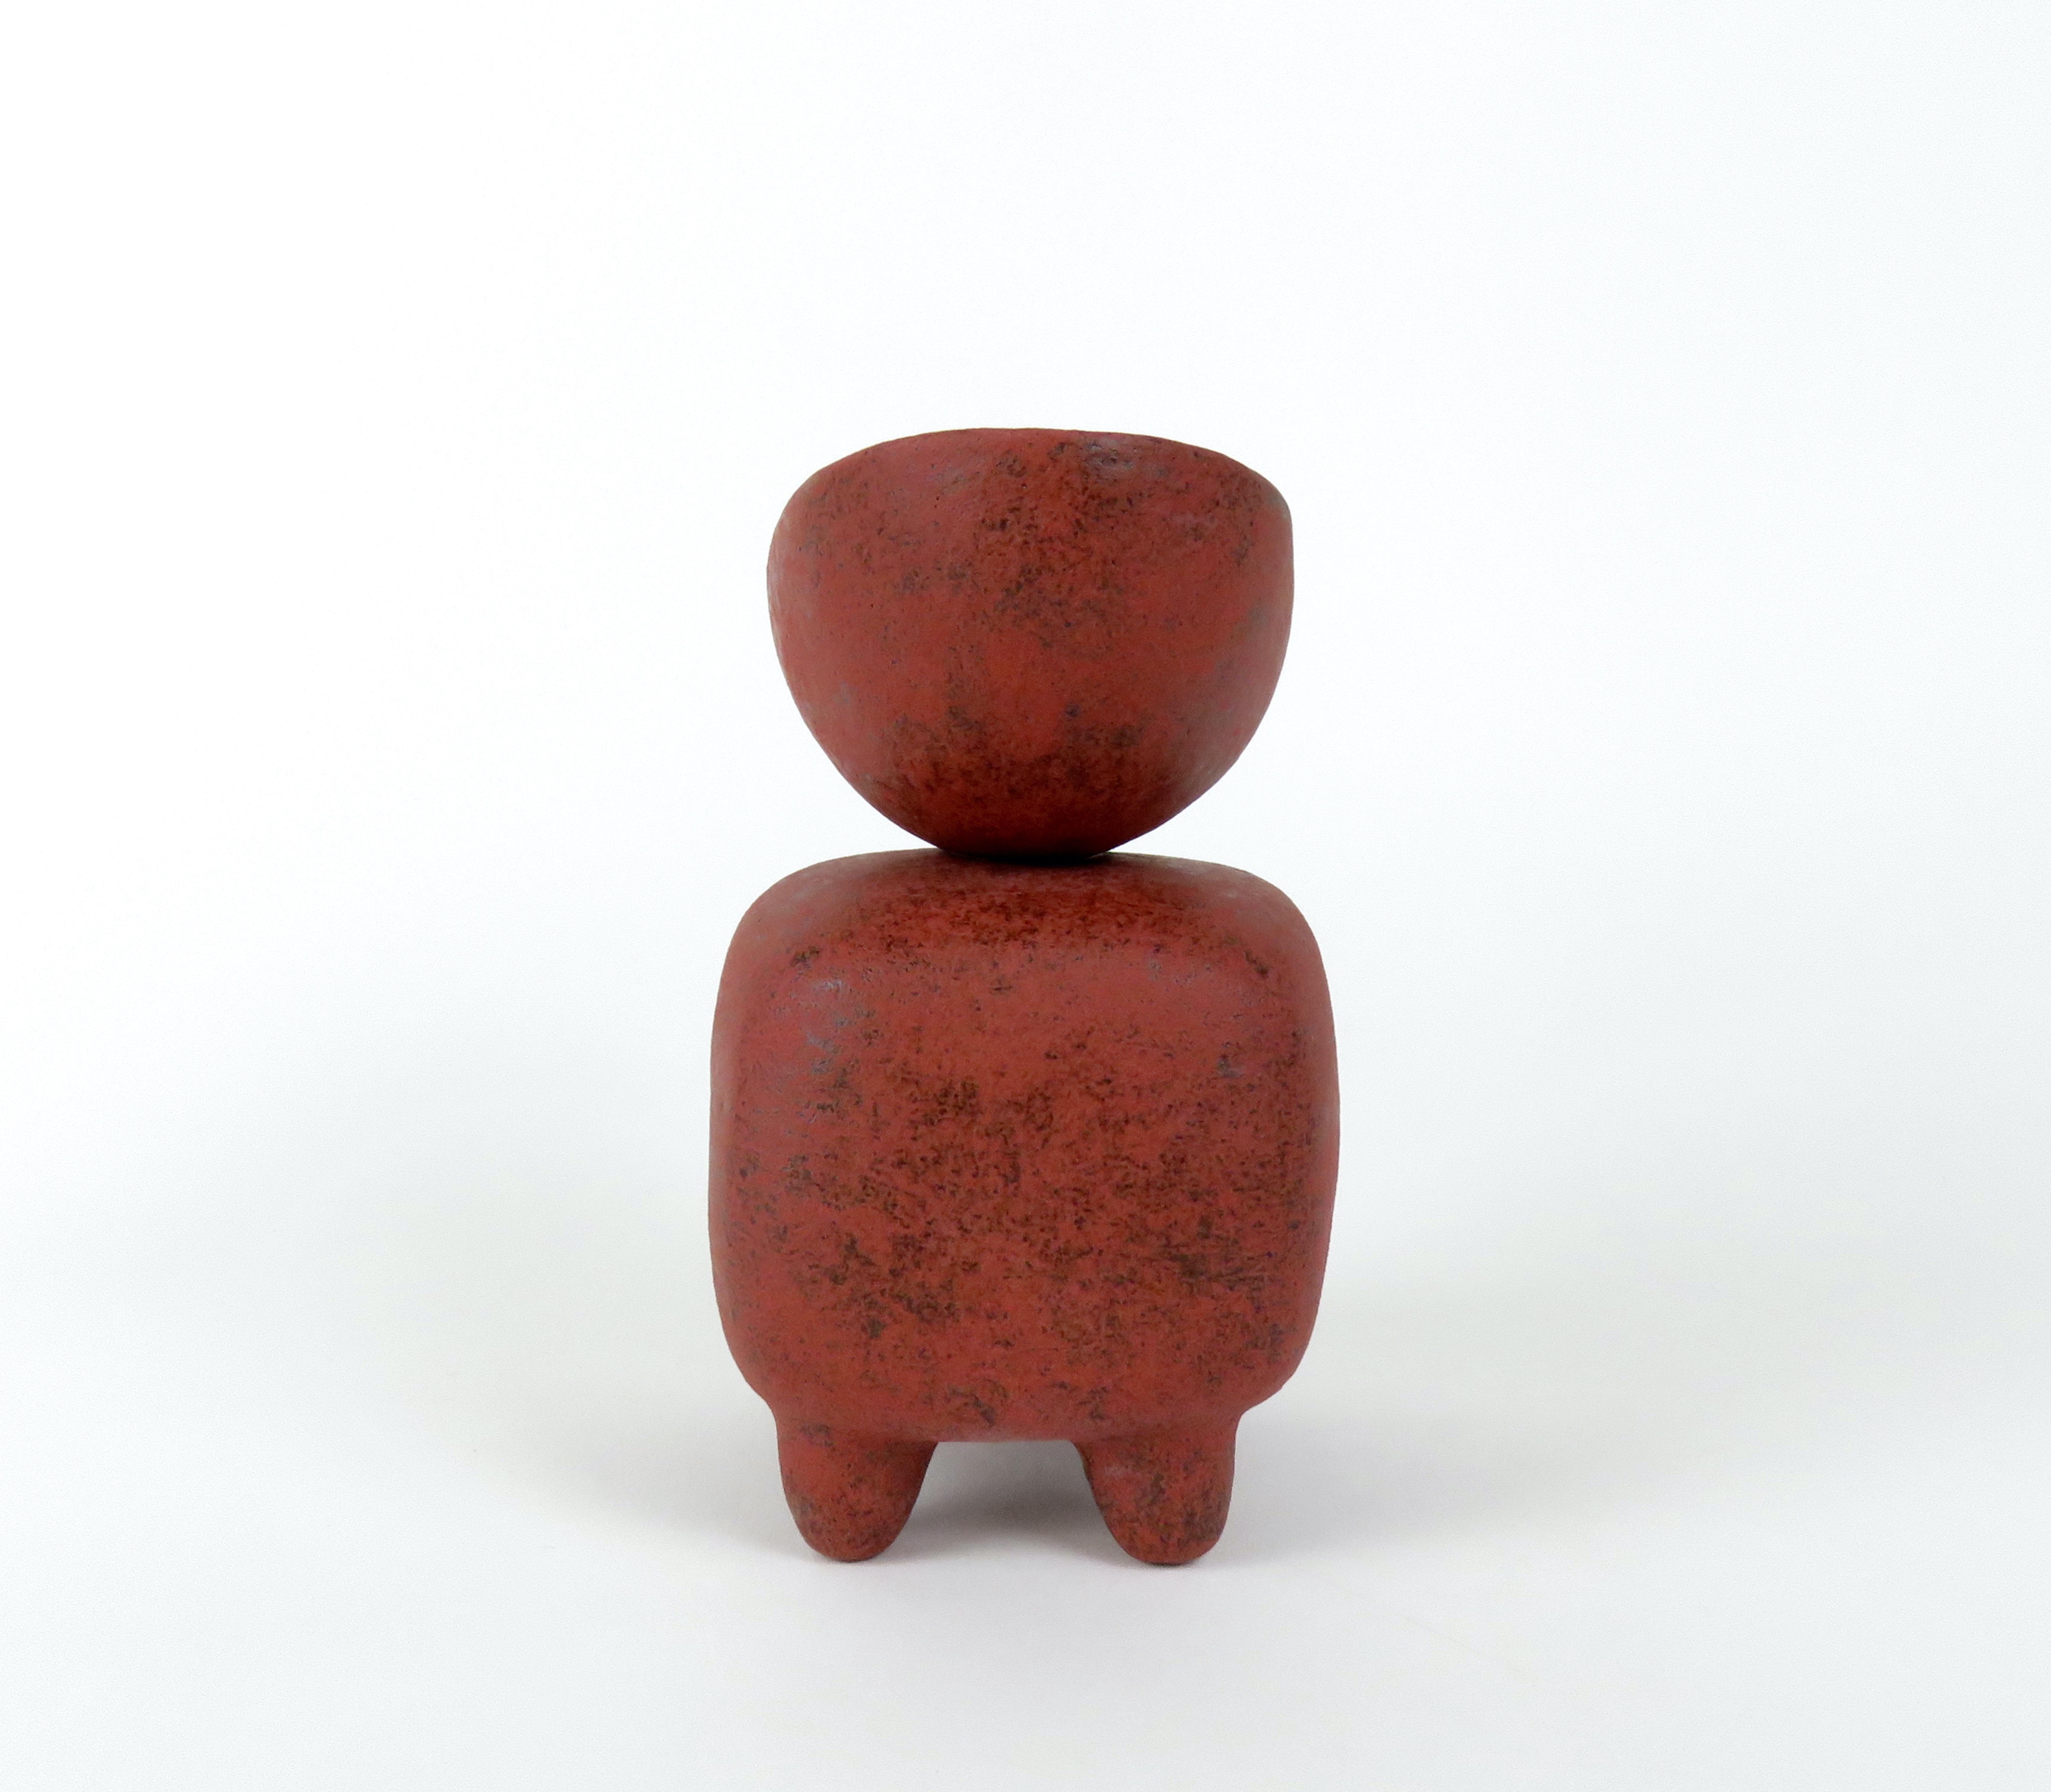 Organic Modern Mottled Red Ceramic Sculpture, Wide Oval Cup on Rounded Cube, Hand Built 